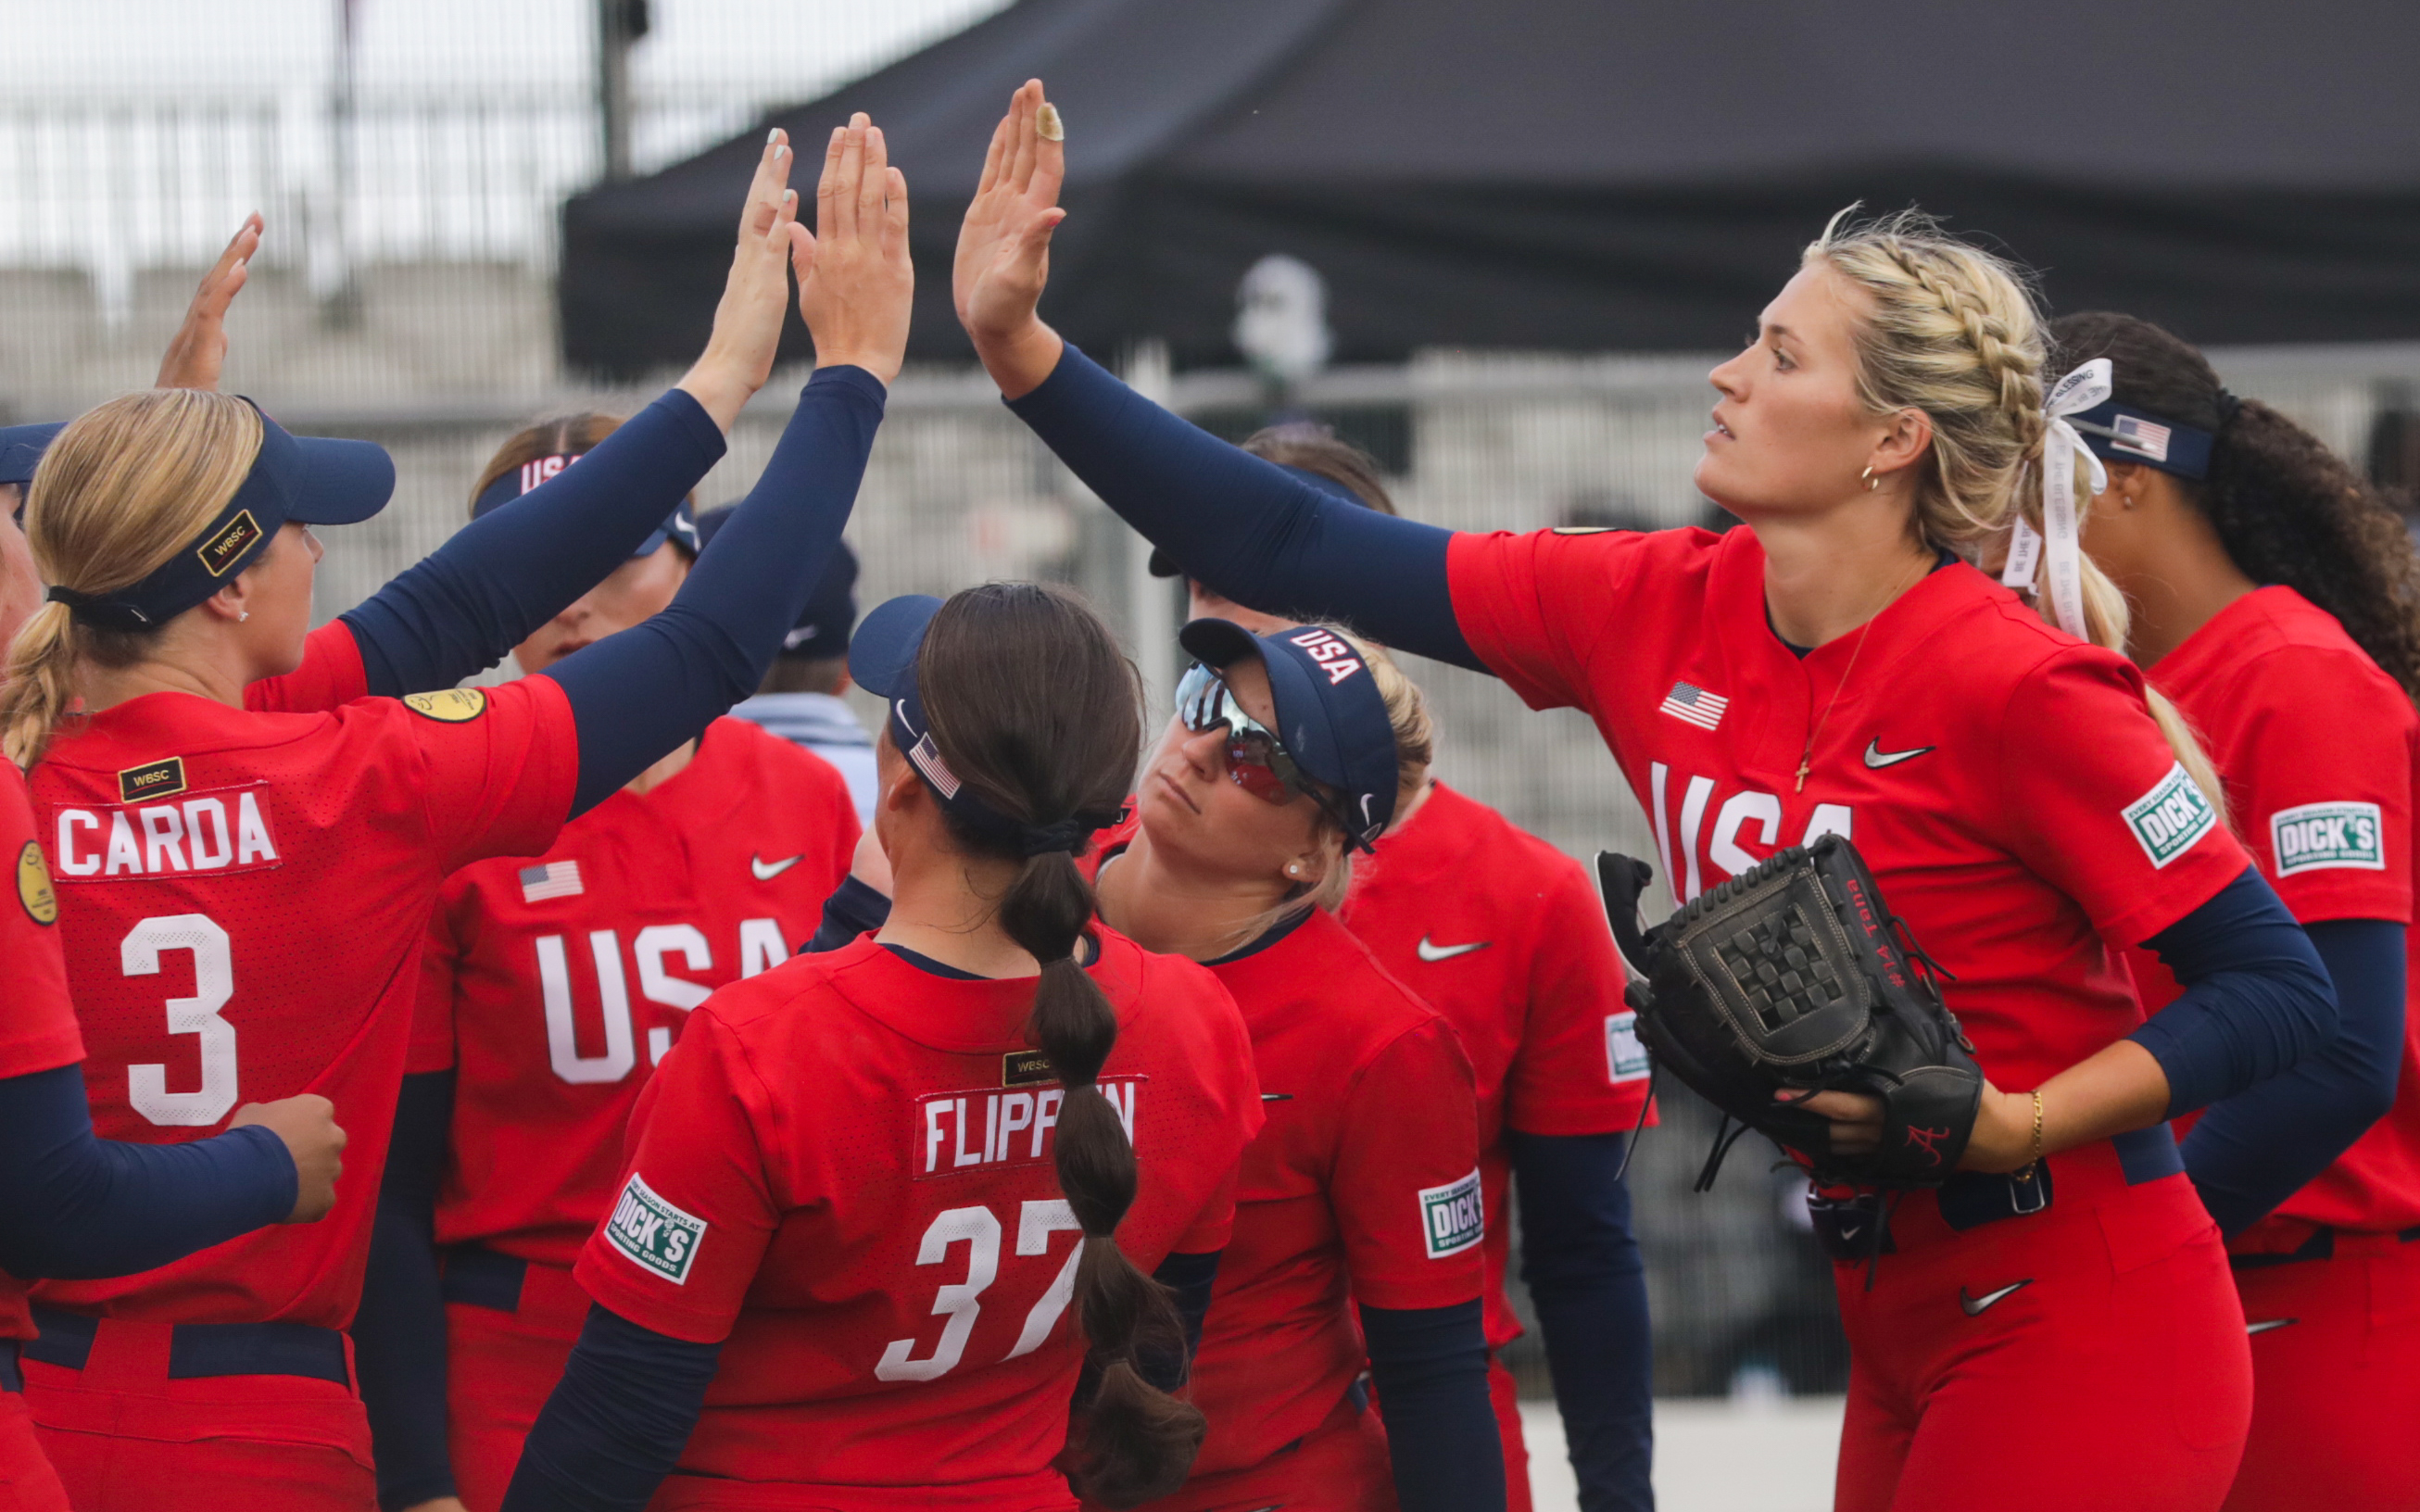 USA Softball announces 16-player Women's National Team roster set to represent Team USA at 2023 Pan American Games featured image